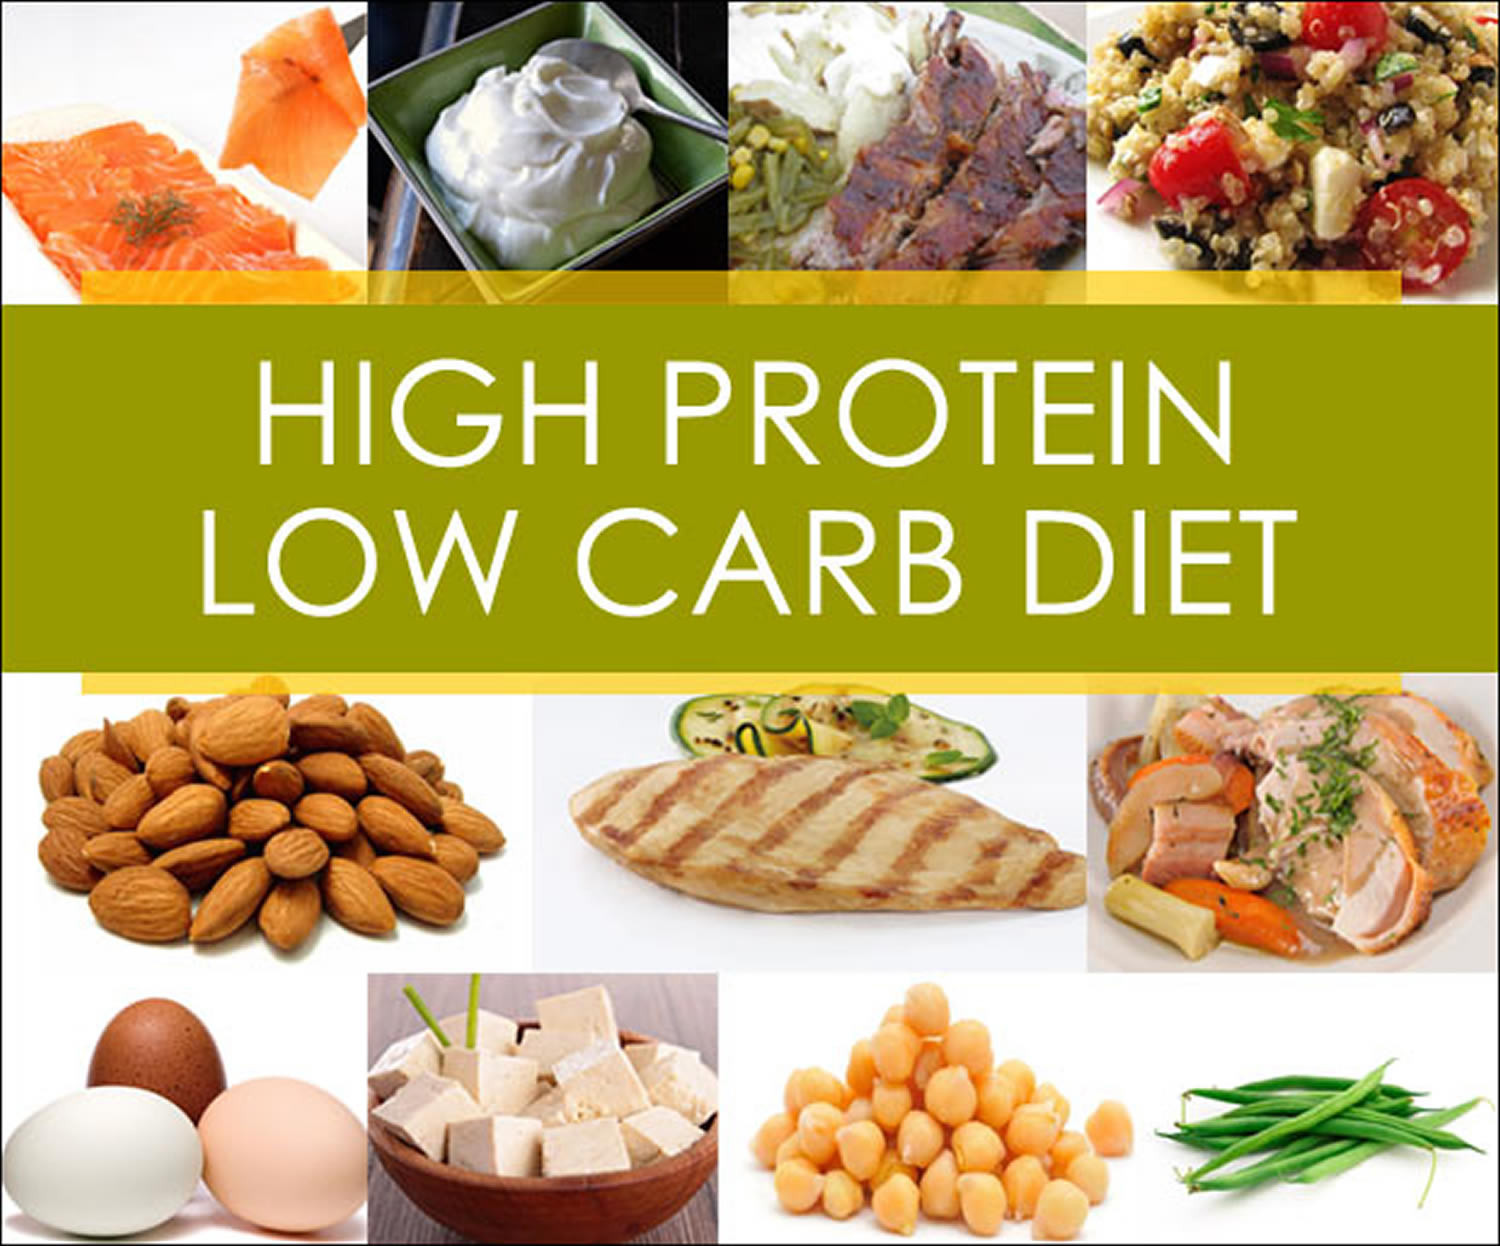 Low Carbohydrate Diet
 High Protein Low Carb Diet for Weight Loss What Are The